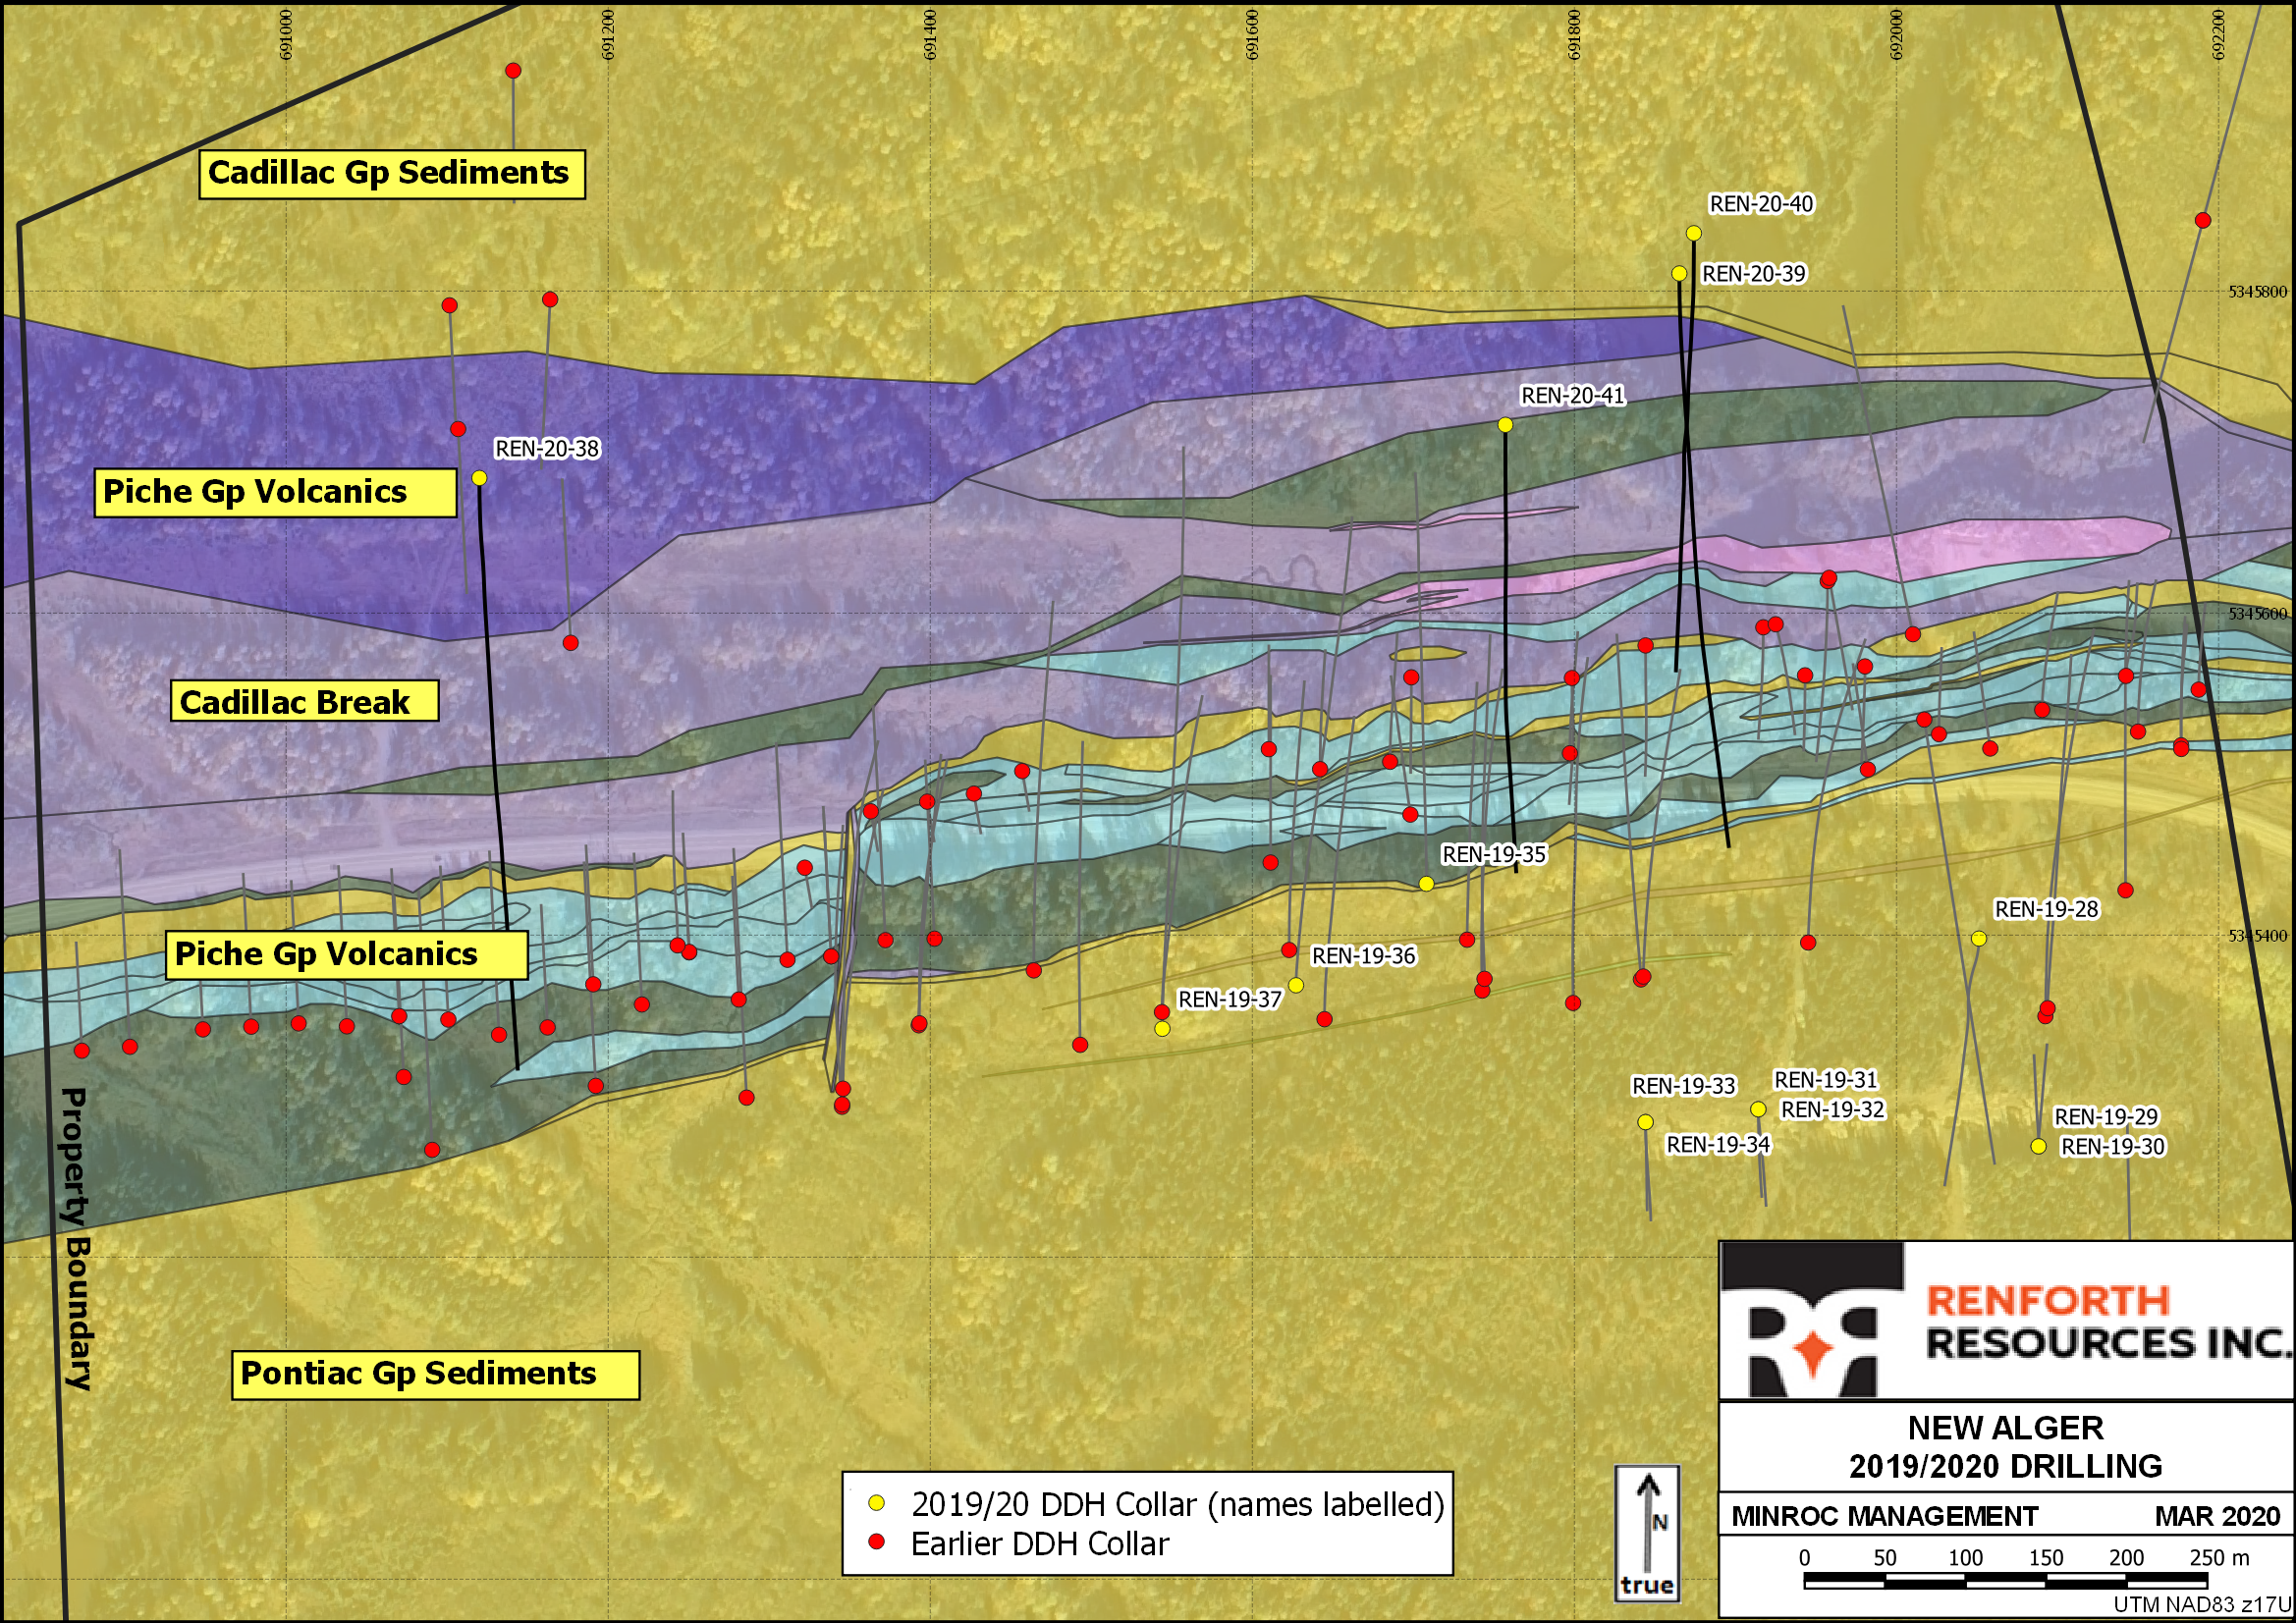 Renforth Resources Inc., Monday, March 23, 2020, Press release picture